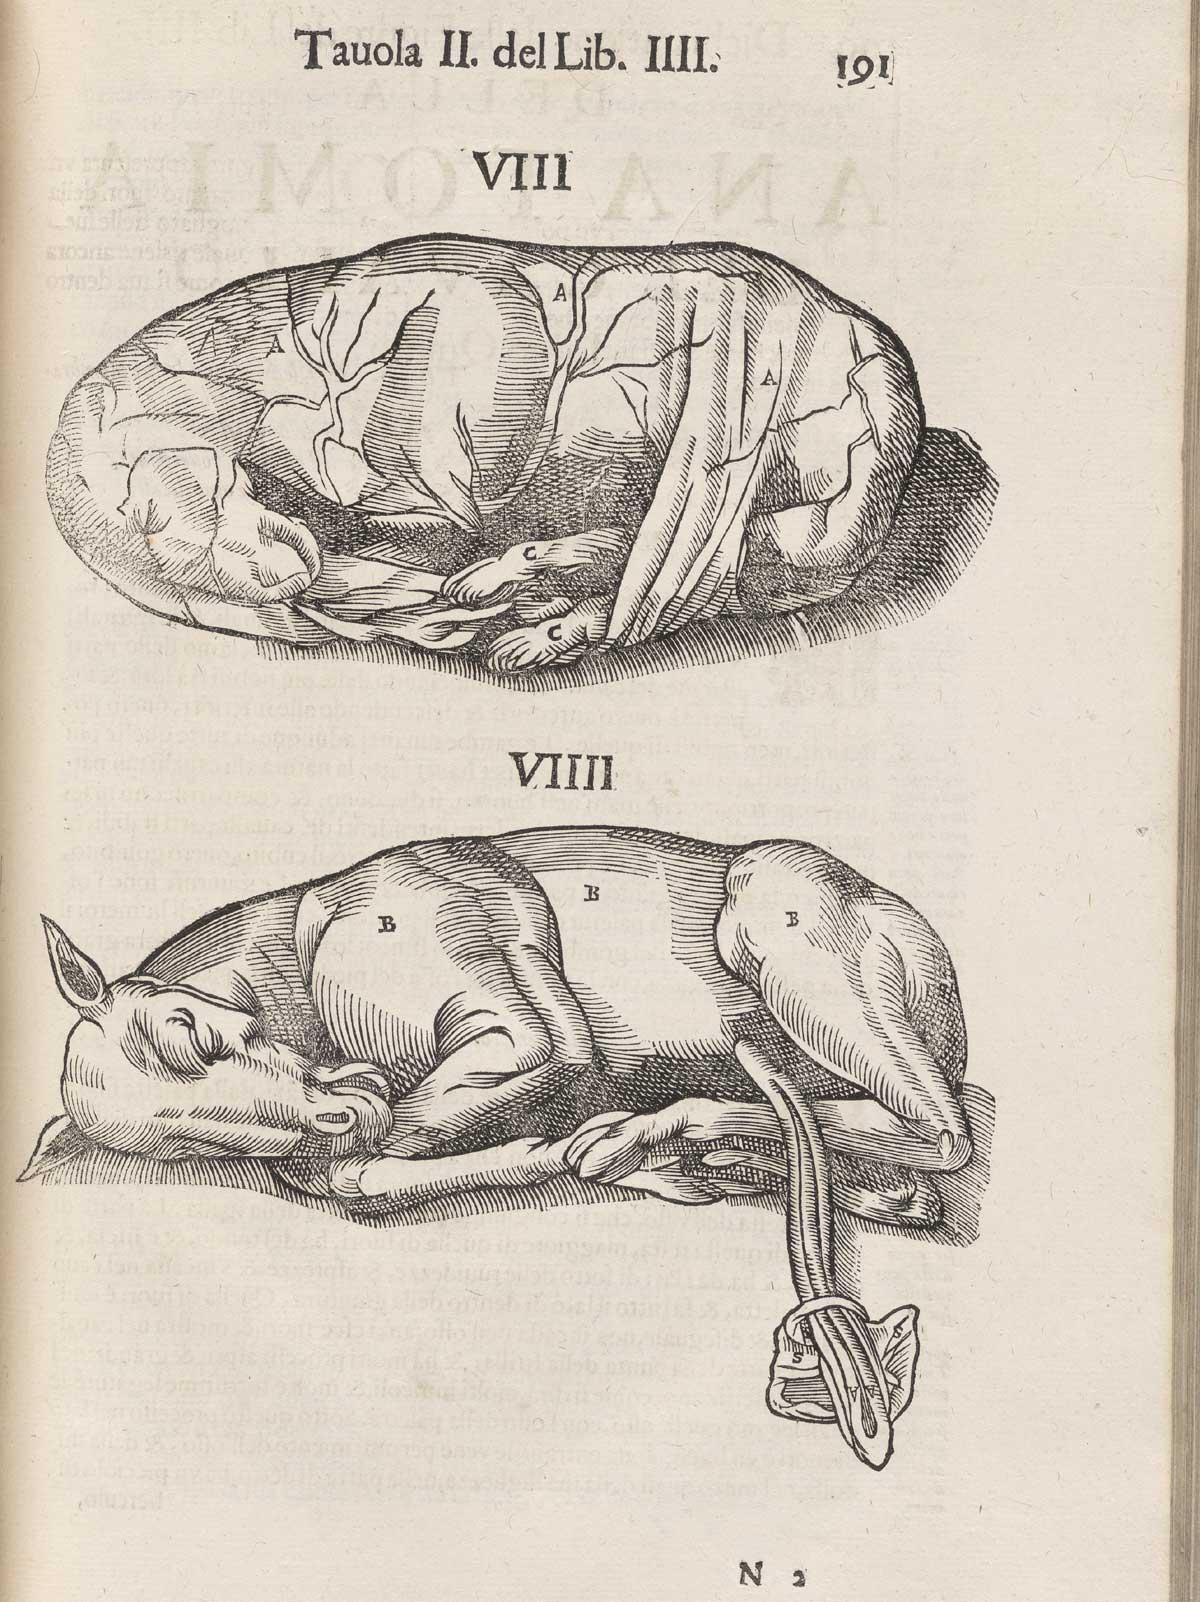 Page 191 of Ruini's Anatomia del cavallo, infermità, et suoi rimedii, featuring two horse fetus. The top fetus is enclosed in the placenta while the bottom fetus shows the umbilical cord extending from its body.